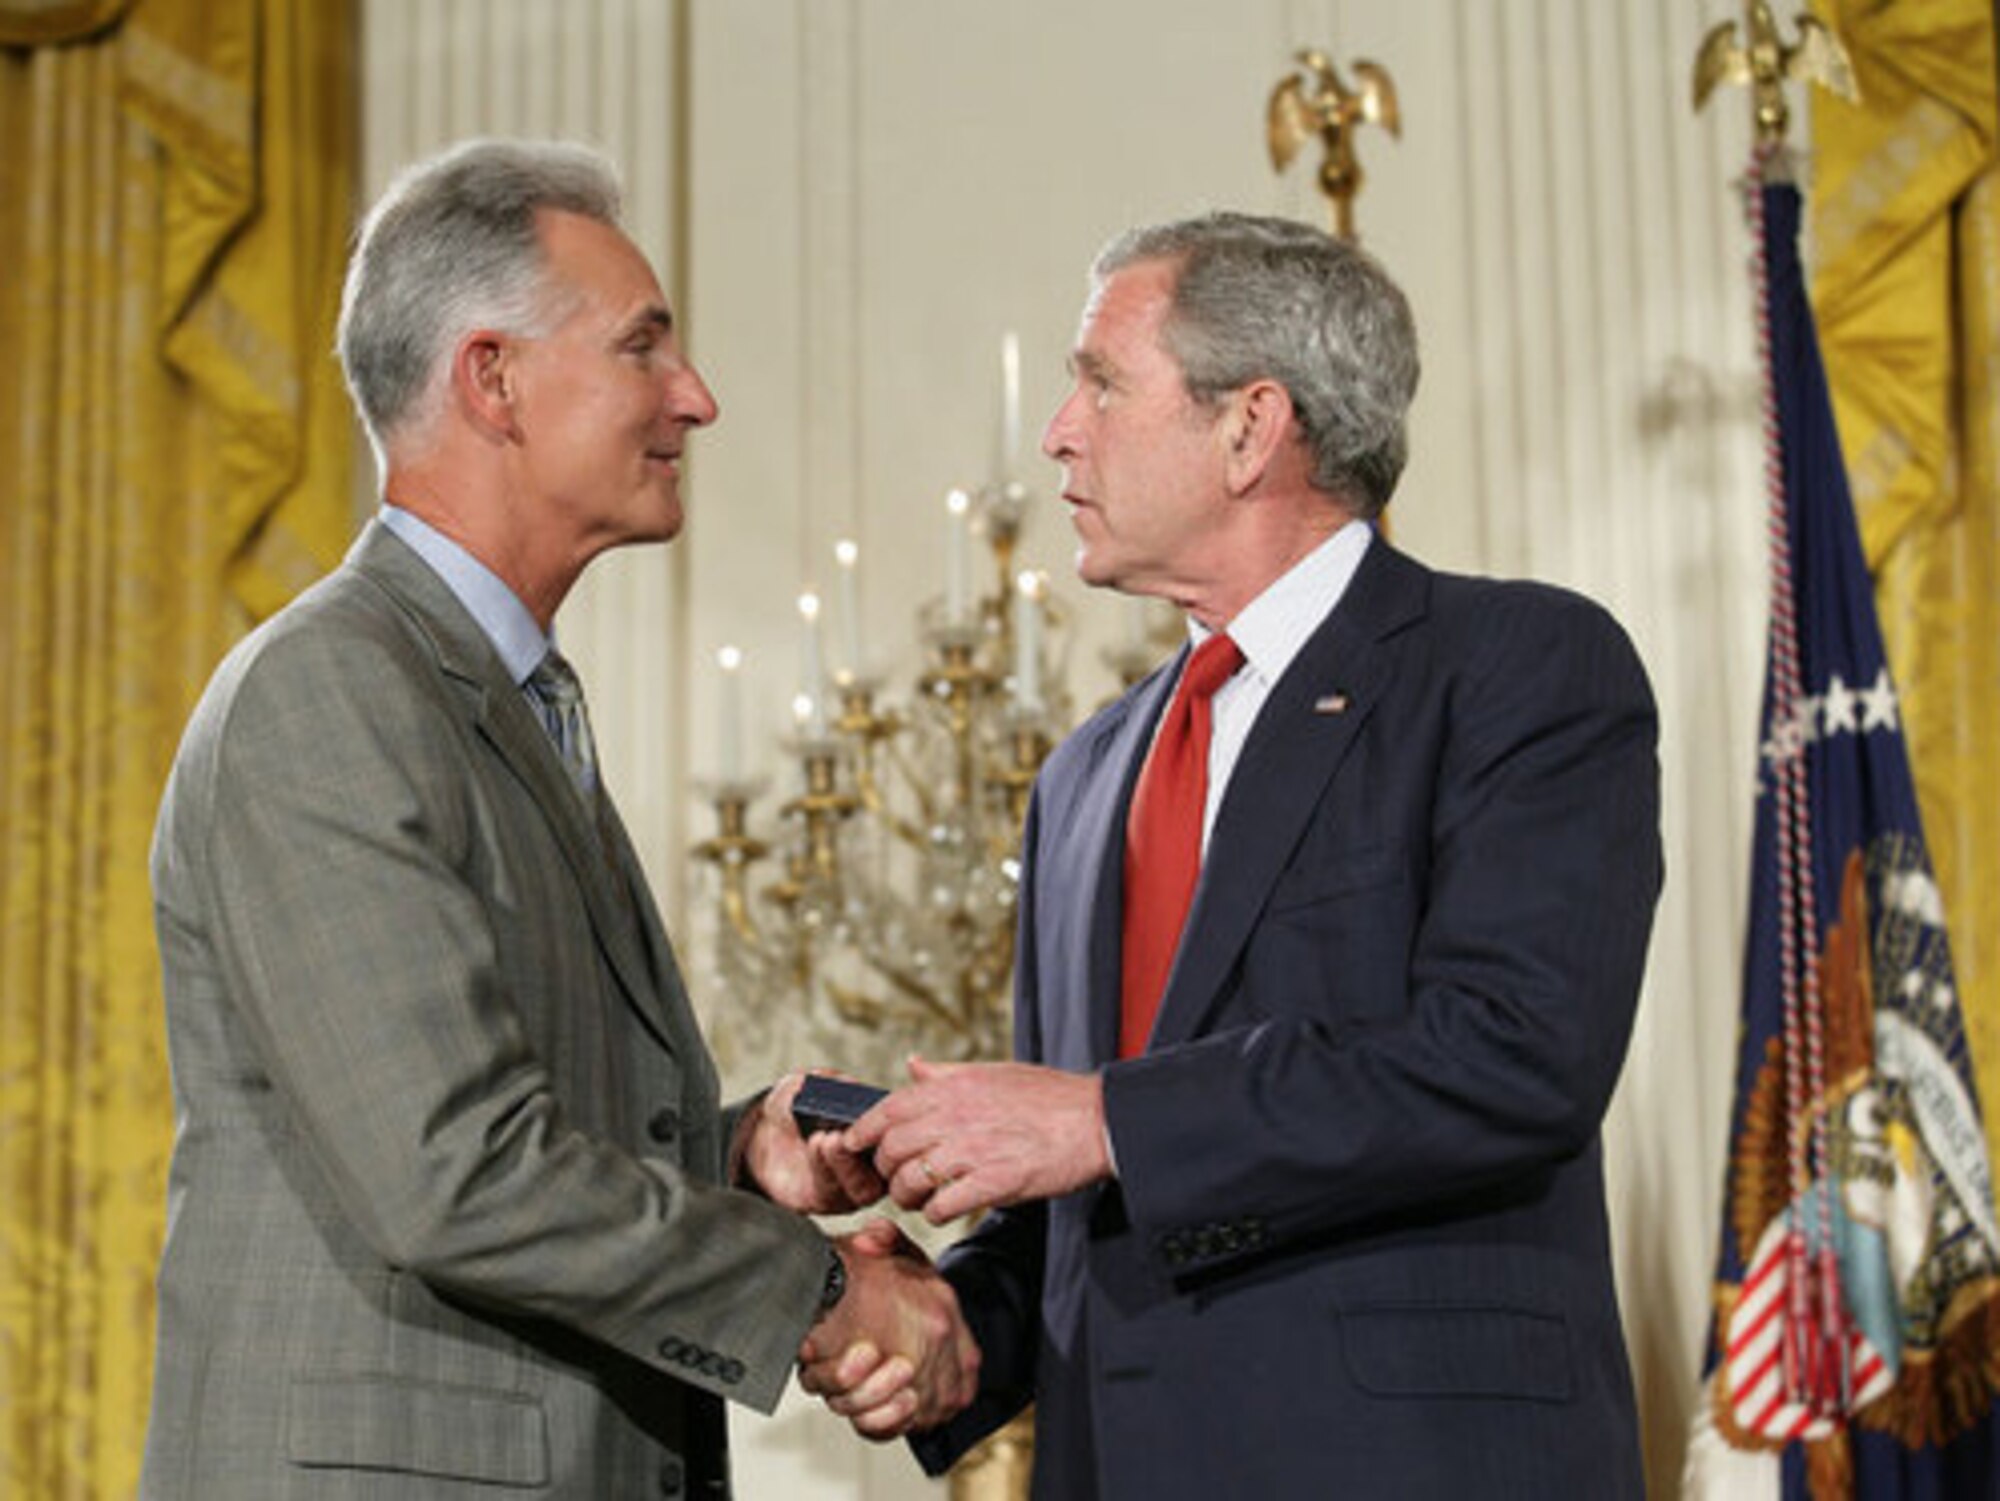 President George W. Bush congratulates military spouse Michael Winton of Wright-Patterson Air Force Base, Ohio, as Mr. Winton is presented with the President’s Volunteer Service Award. The ceremony occurred May 11 in the East Room of the White House during a celebration of Military Spouse Day. (White House photo by Eric Draper)